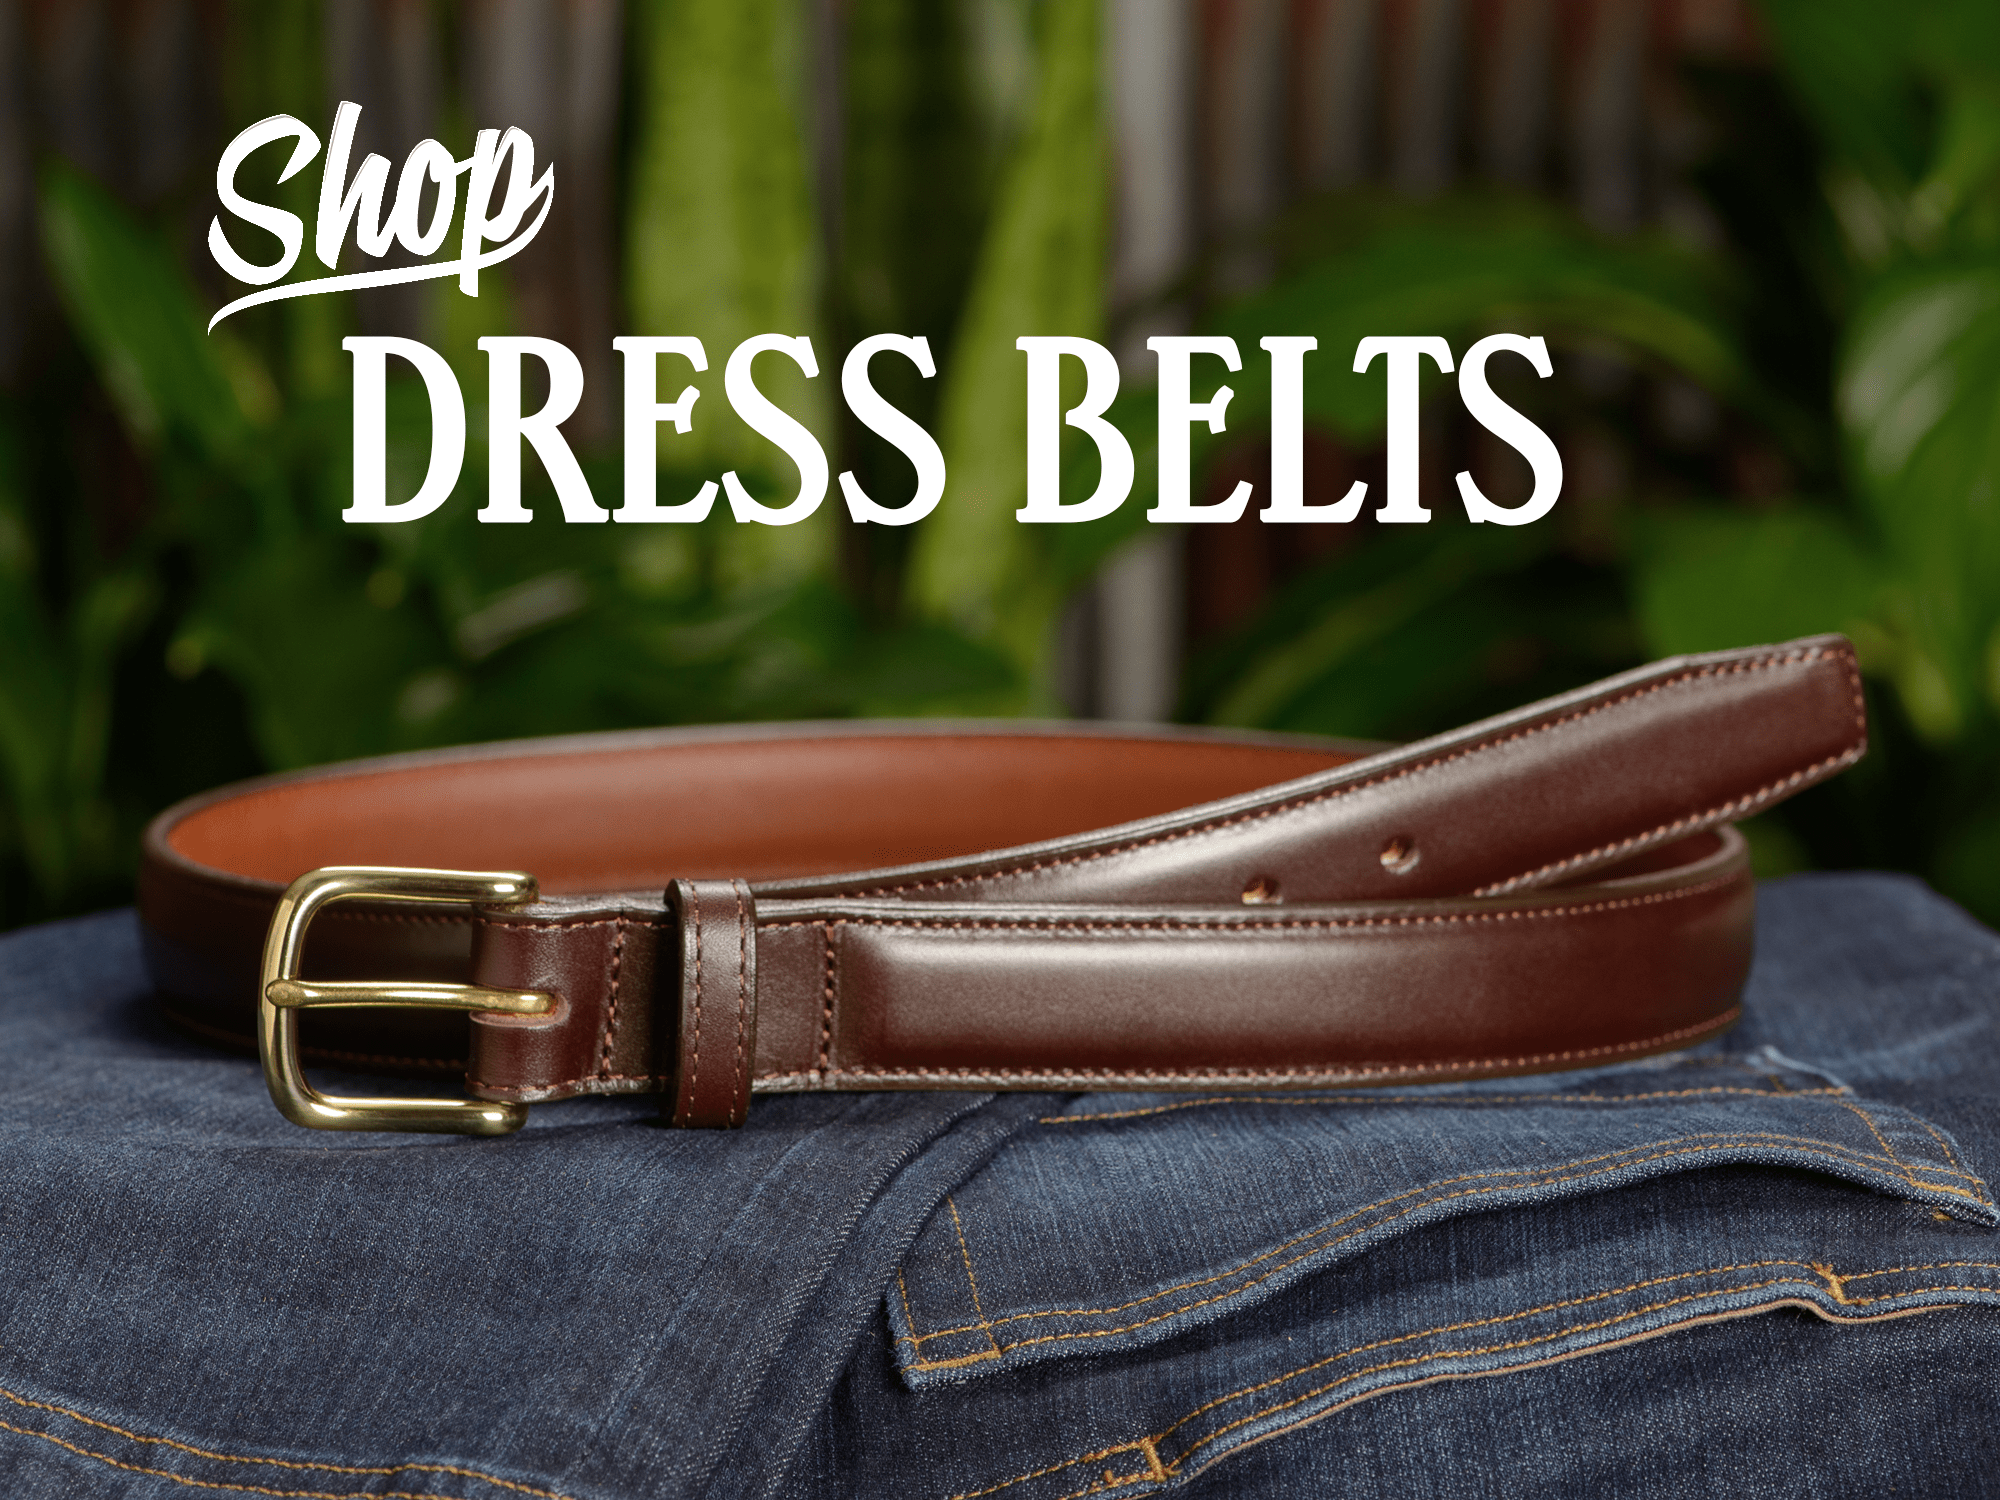 High Quality Handcrafted USA Made Work Belts | Bullhide Belts